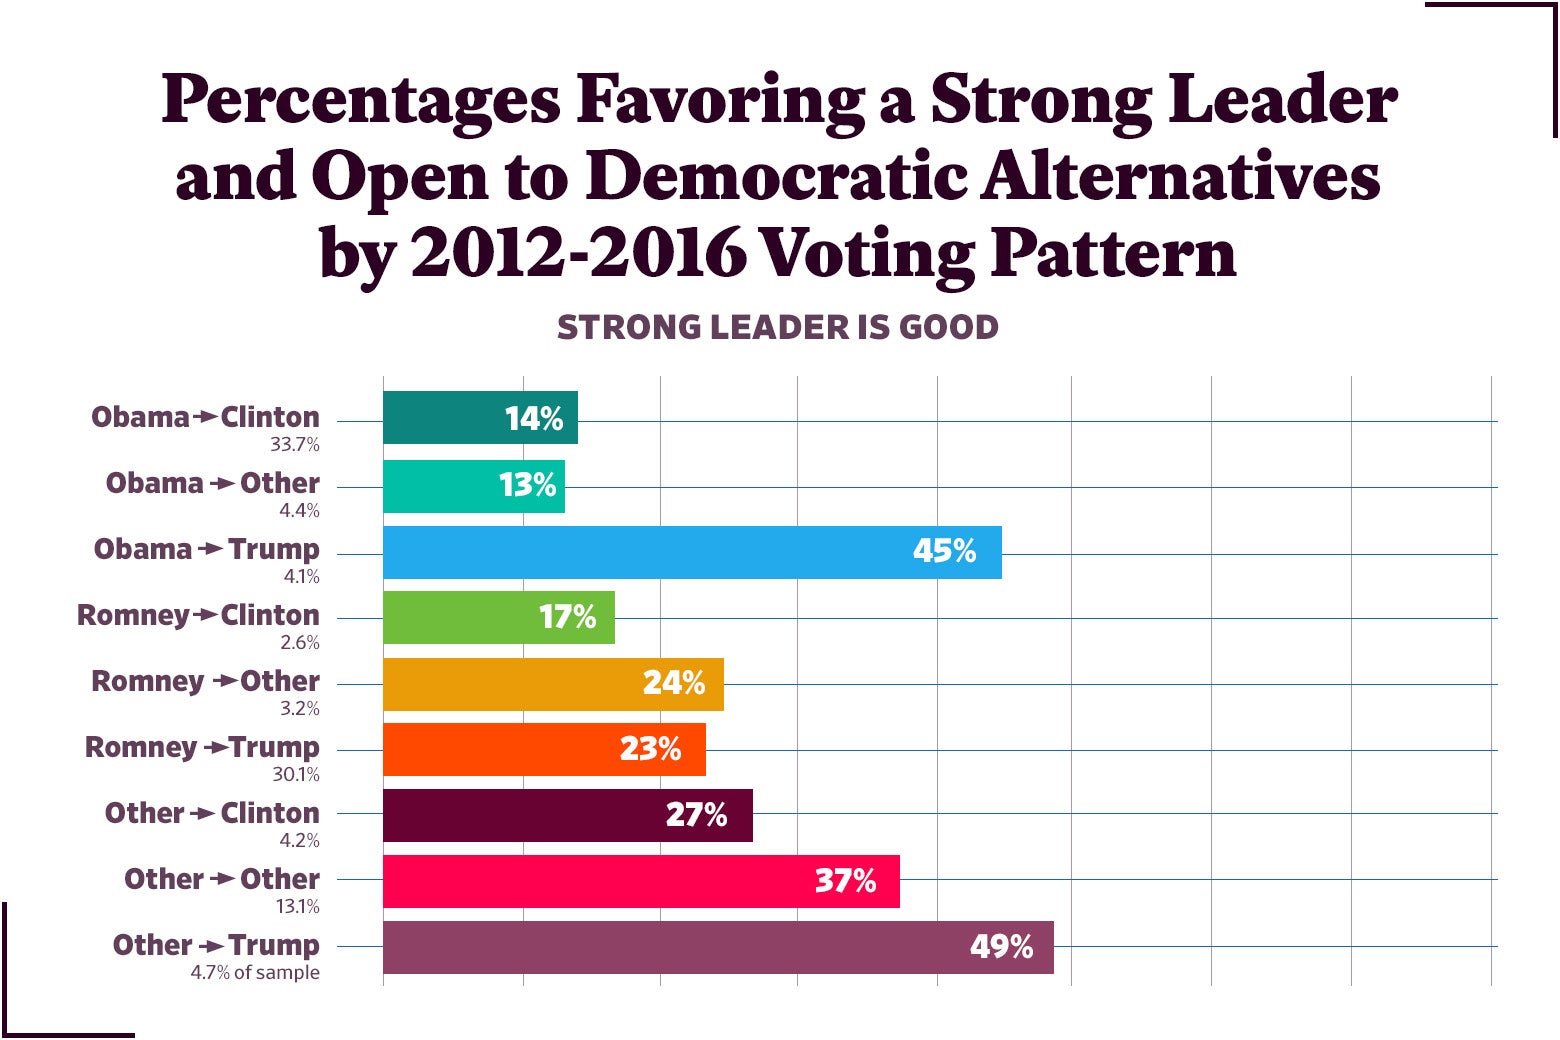 Figure 18: Percentages Favoring a Strong Leader and Open to Democratic Alternatives by 2012-2016 Voting Pattern